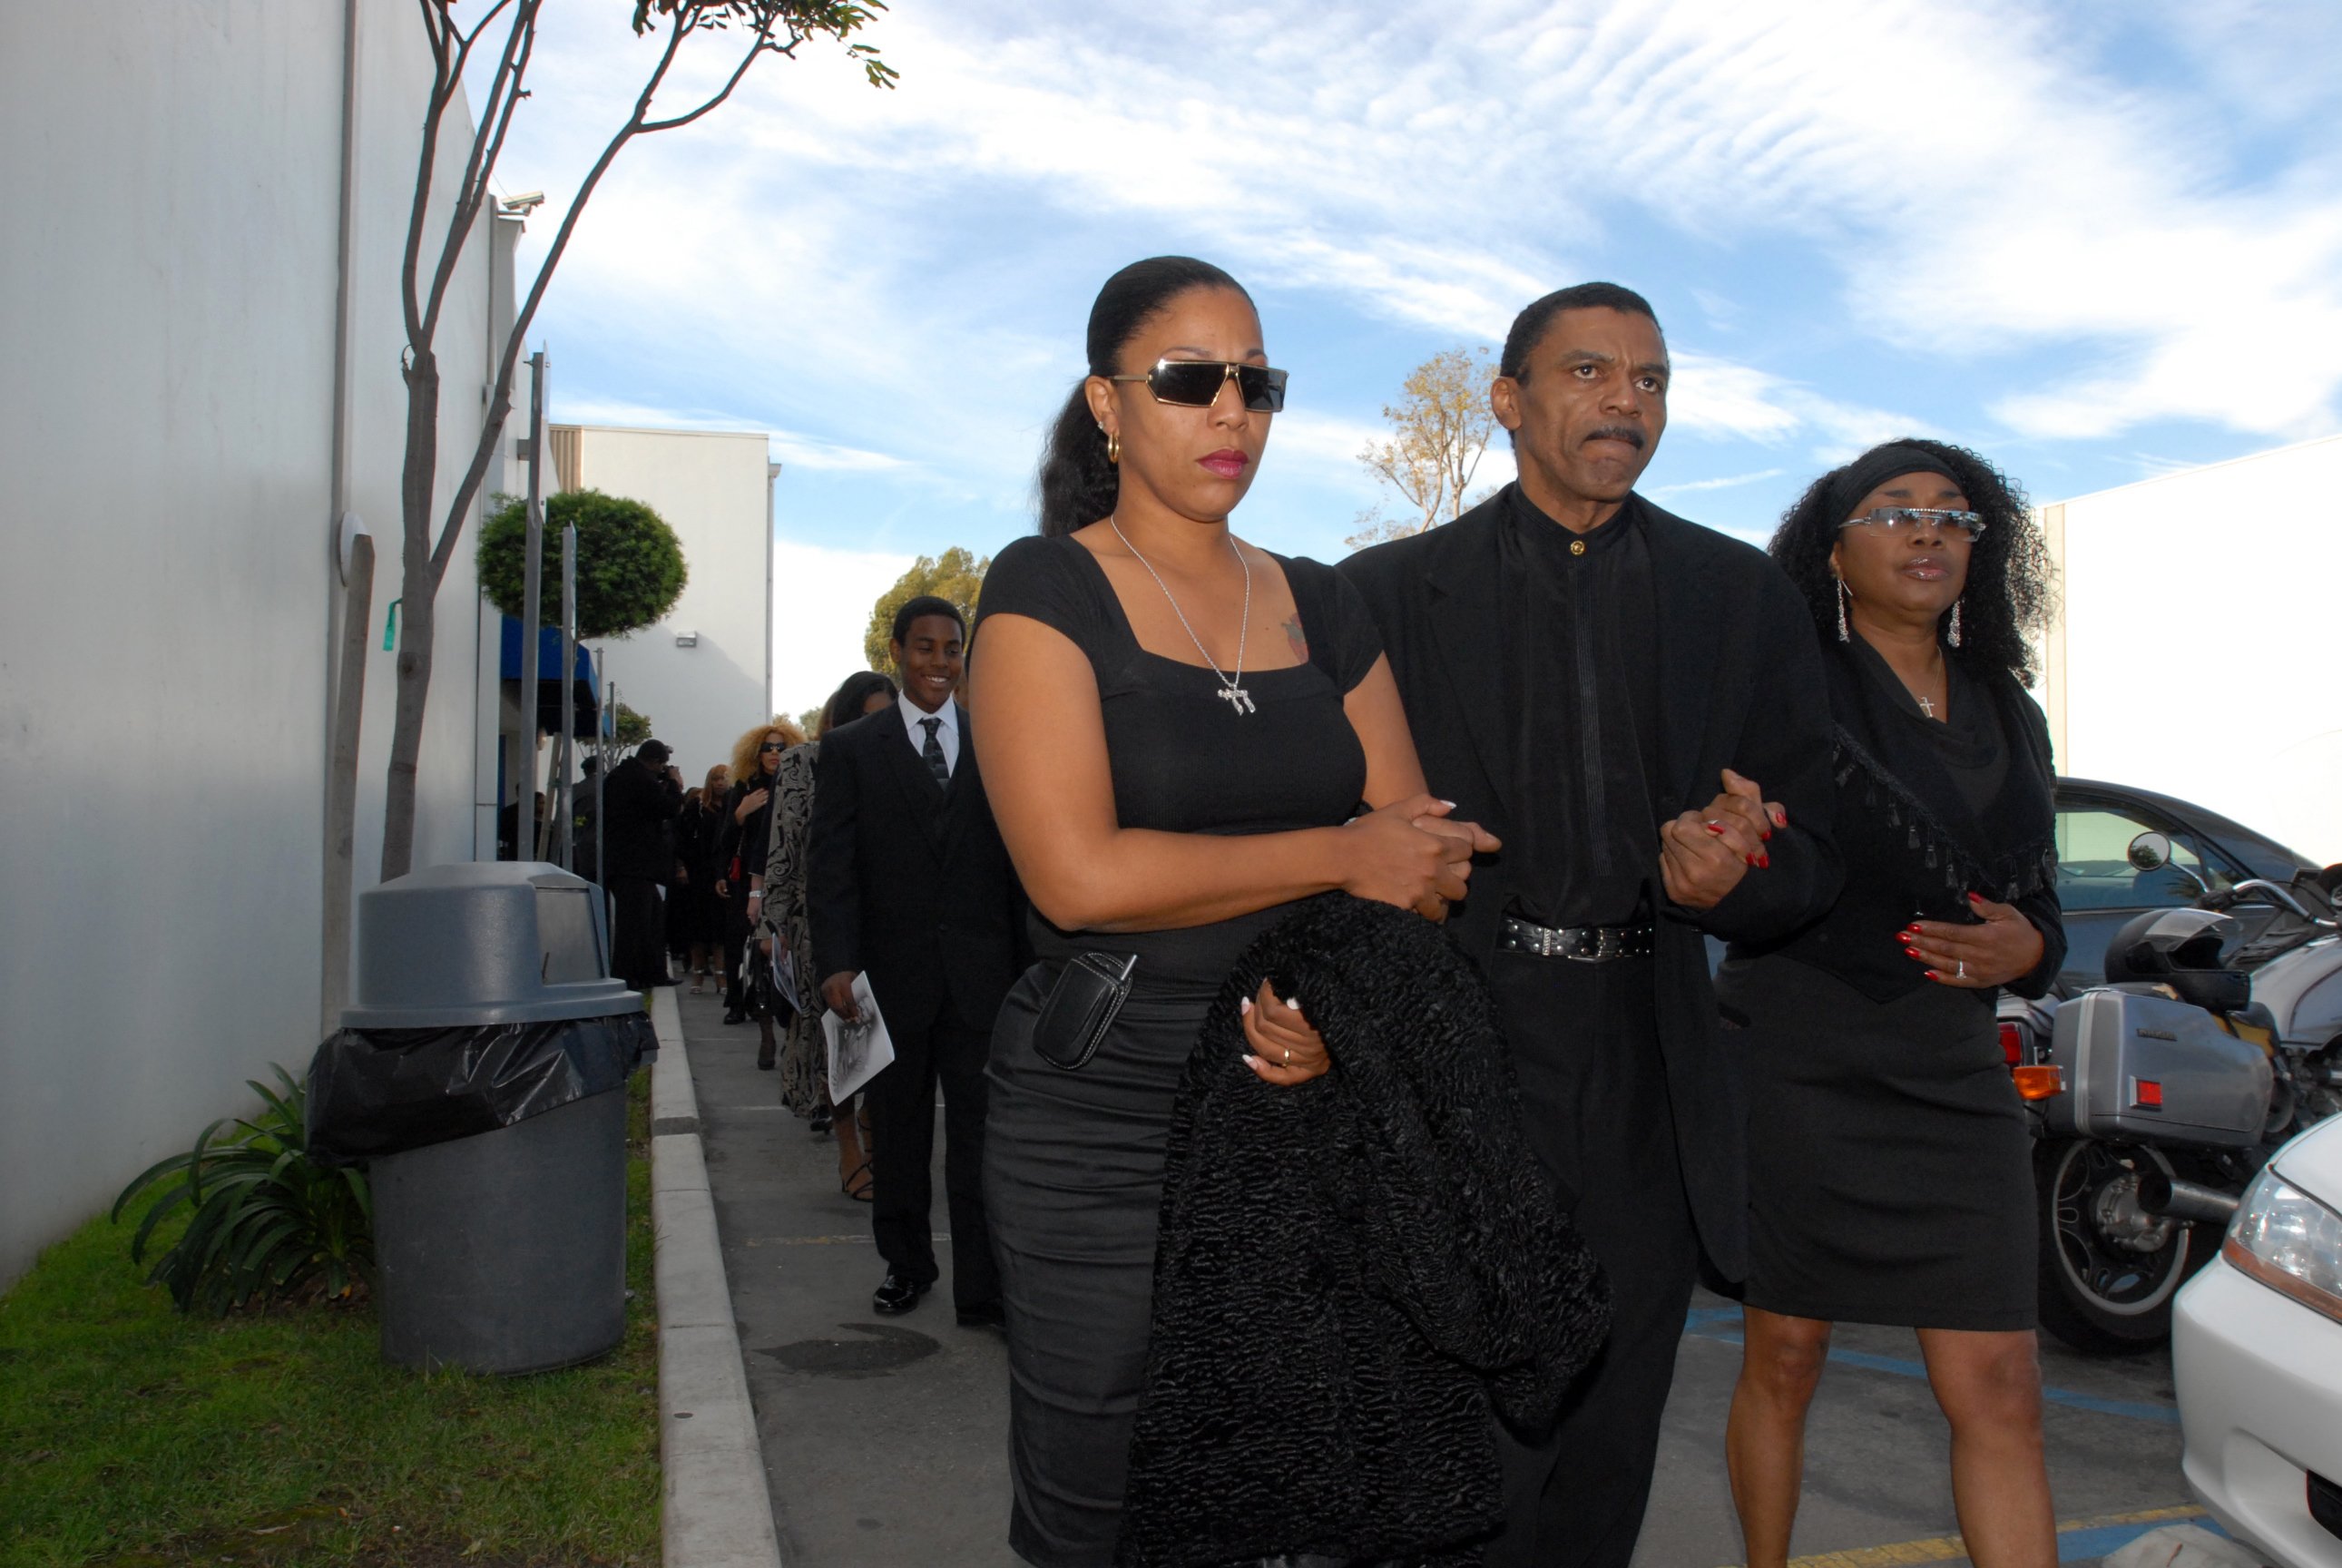 Ike Turner Jr., Mia Turner, and Mary Ellis, at the memorial service of Ike Turner, hosted at the City of Refuge Greater Bethany Community Church in Gardena, California, on December 21, 2007. | Source: Getty Images